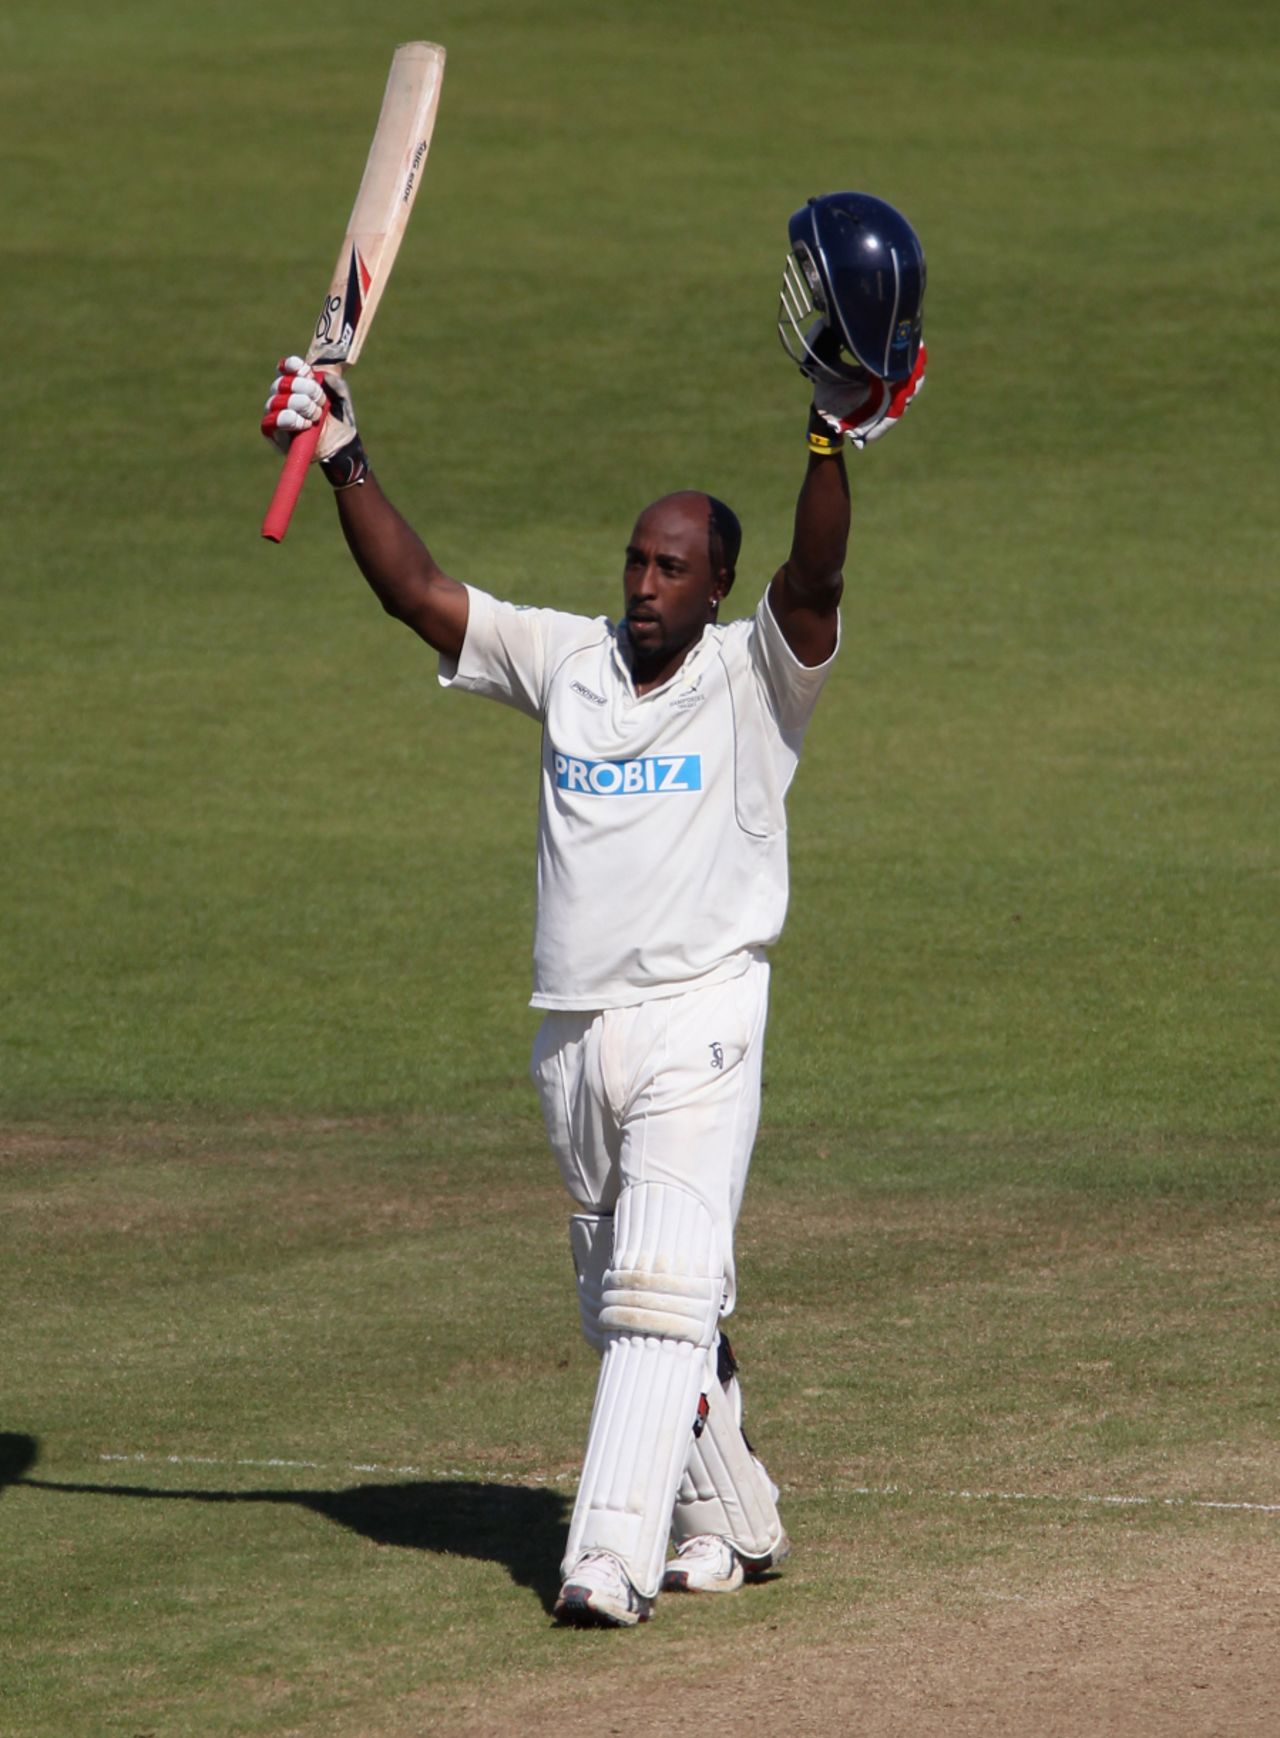 Michael Carberry celebrates his hundred against Warwickshire, Hampshire v Warwickshire, County Championship, Division One, September 15, 2011